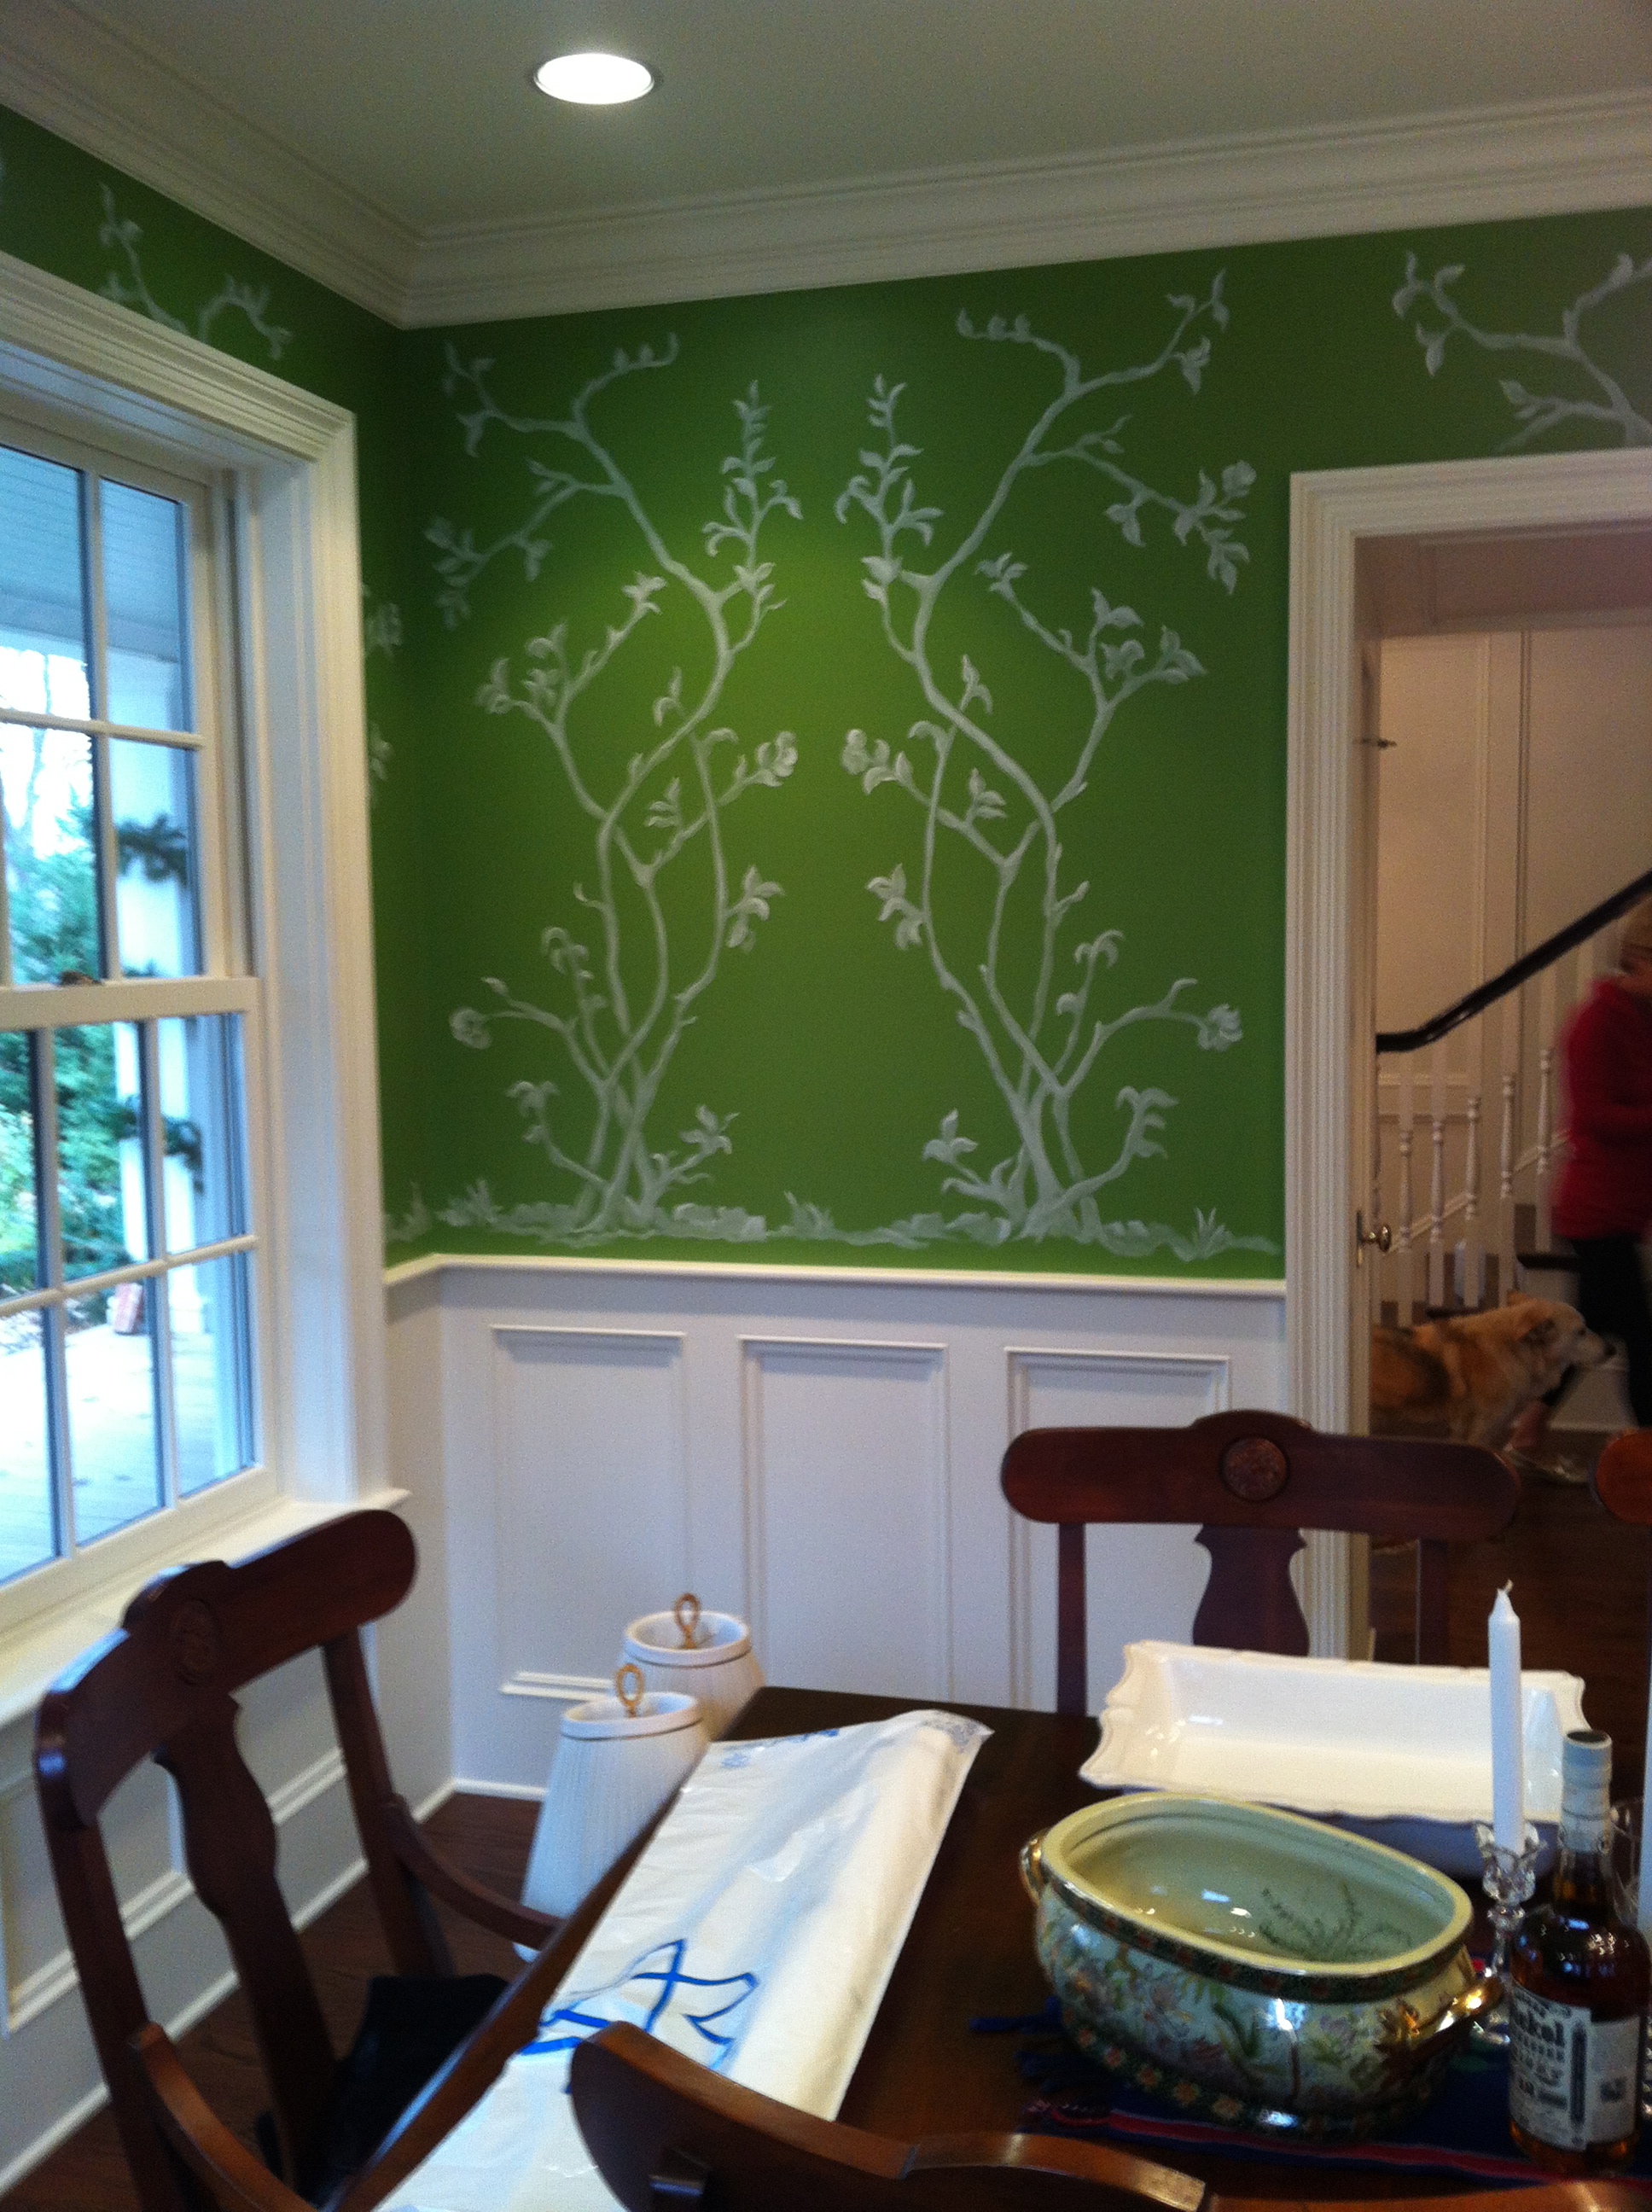  Custom designed and painted scene for dining room 